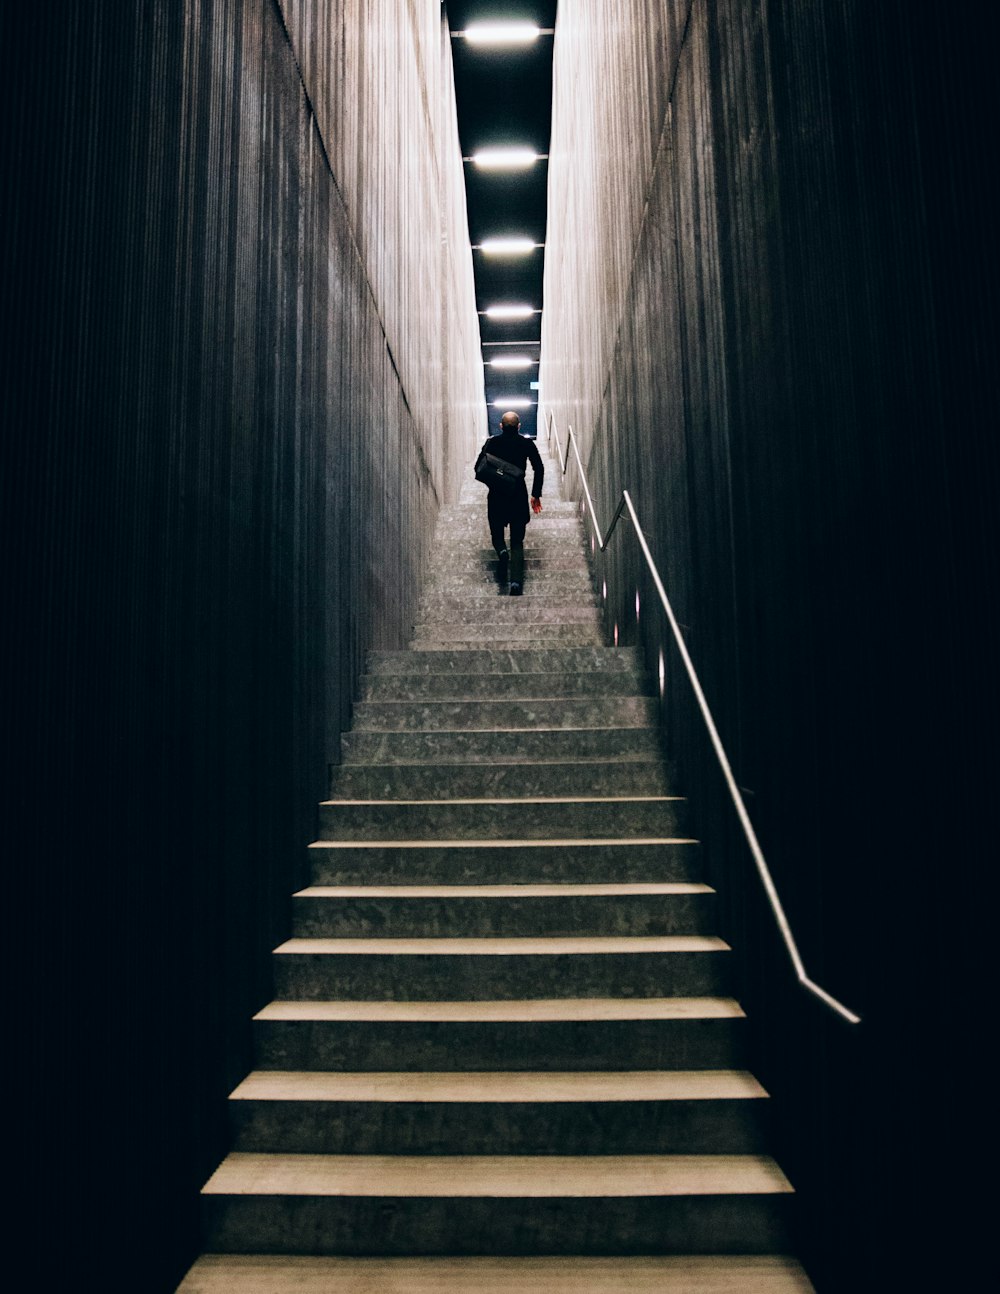 Man In Black Pants Going Down Stairs Photo Free Melbourne Image On Unsplash